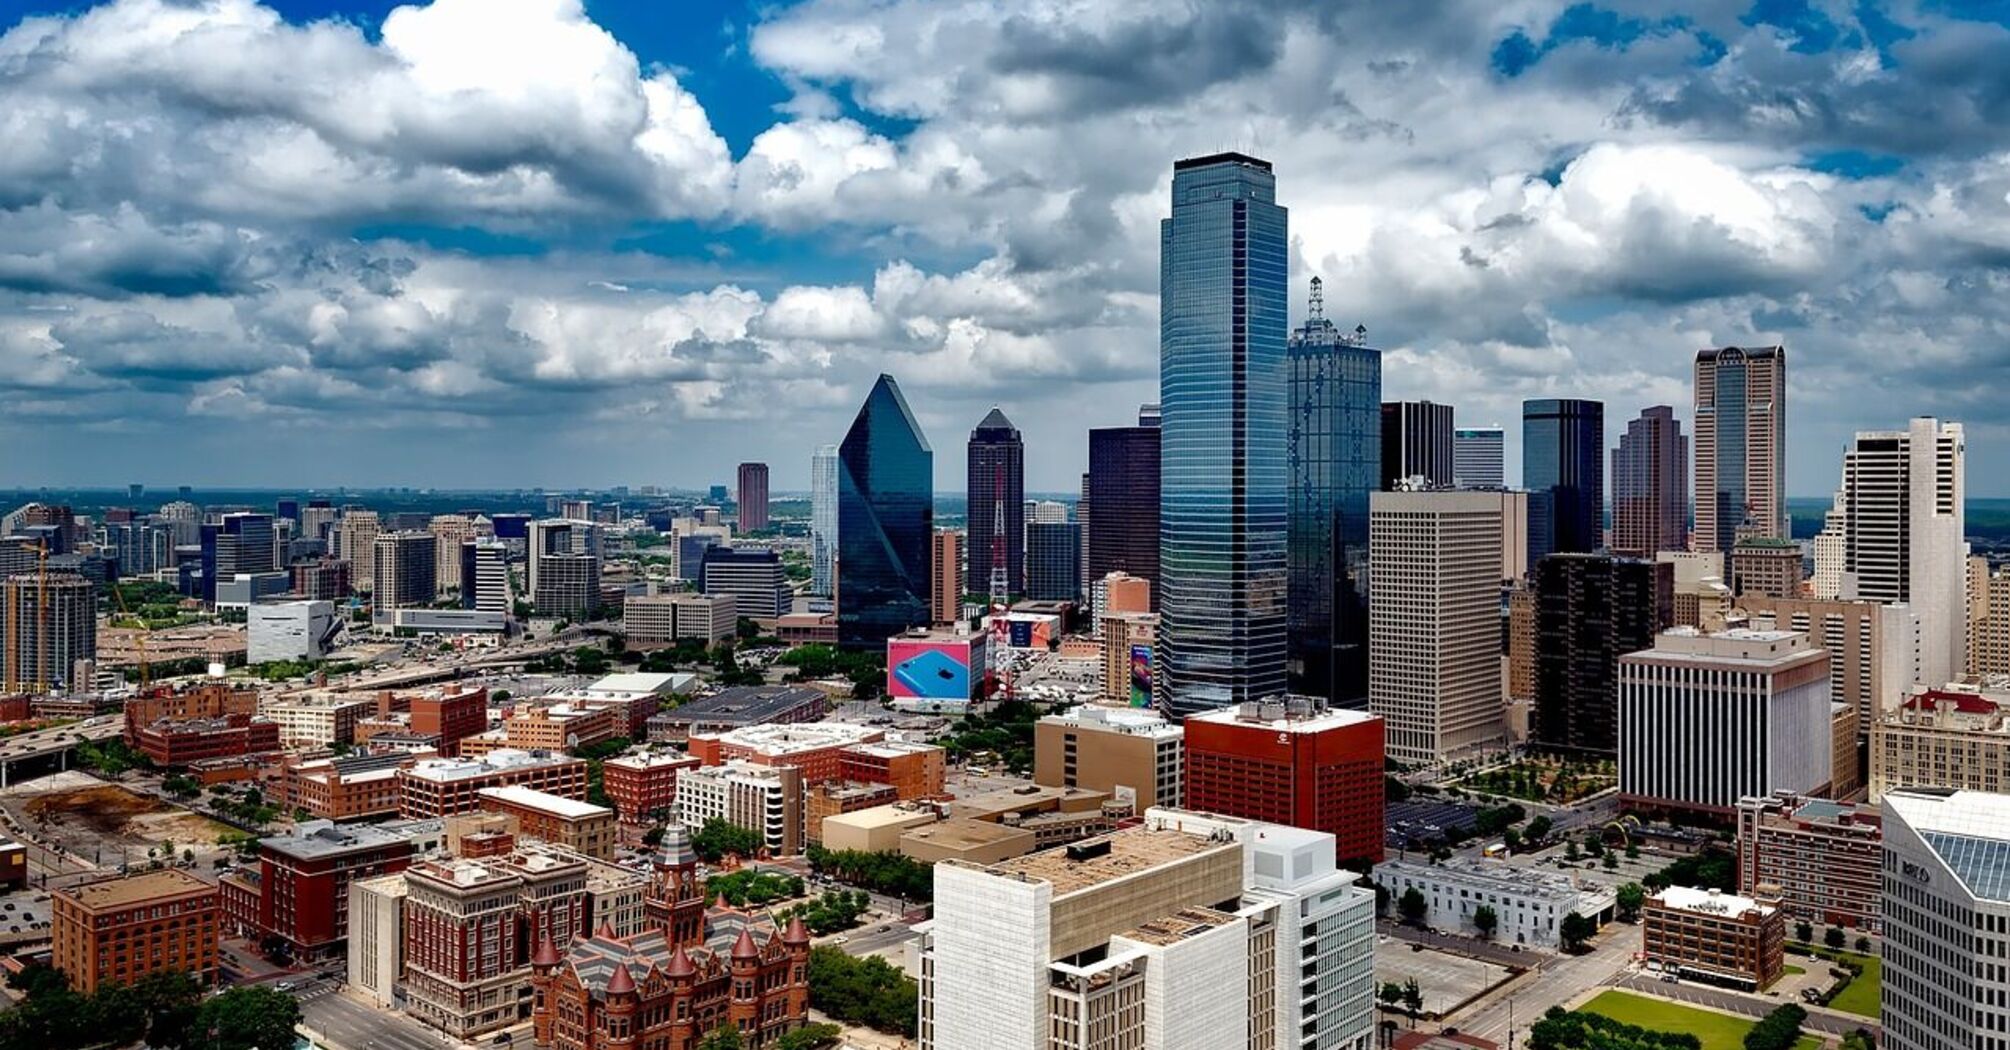 TOP 15 hotels in Dallas, Texas: places that will impress everyone